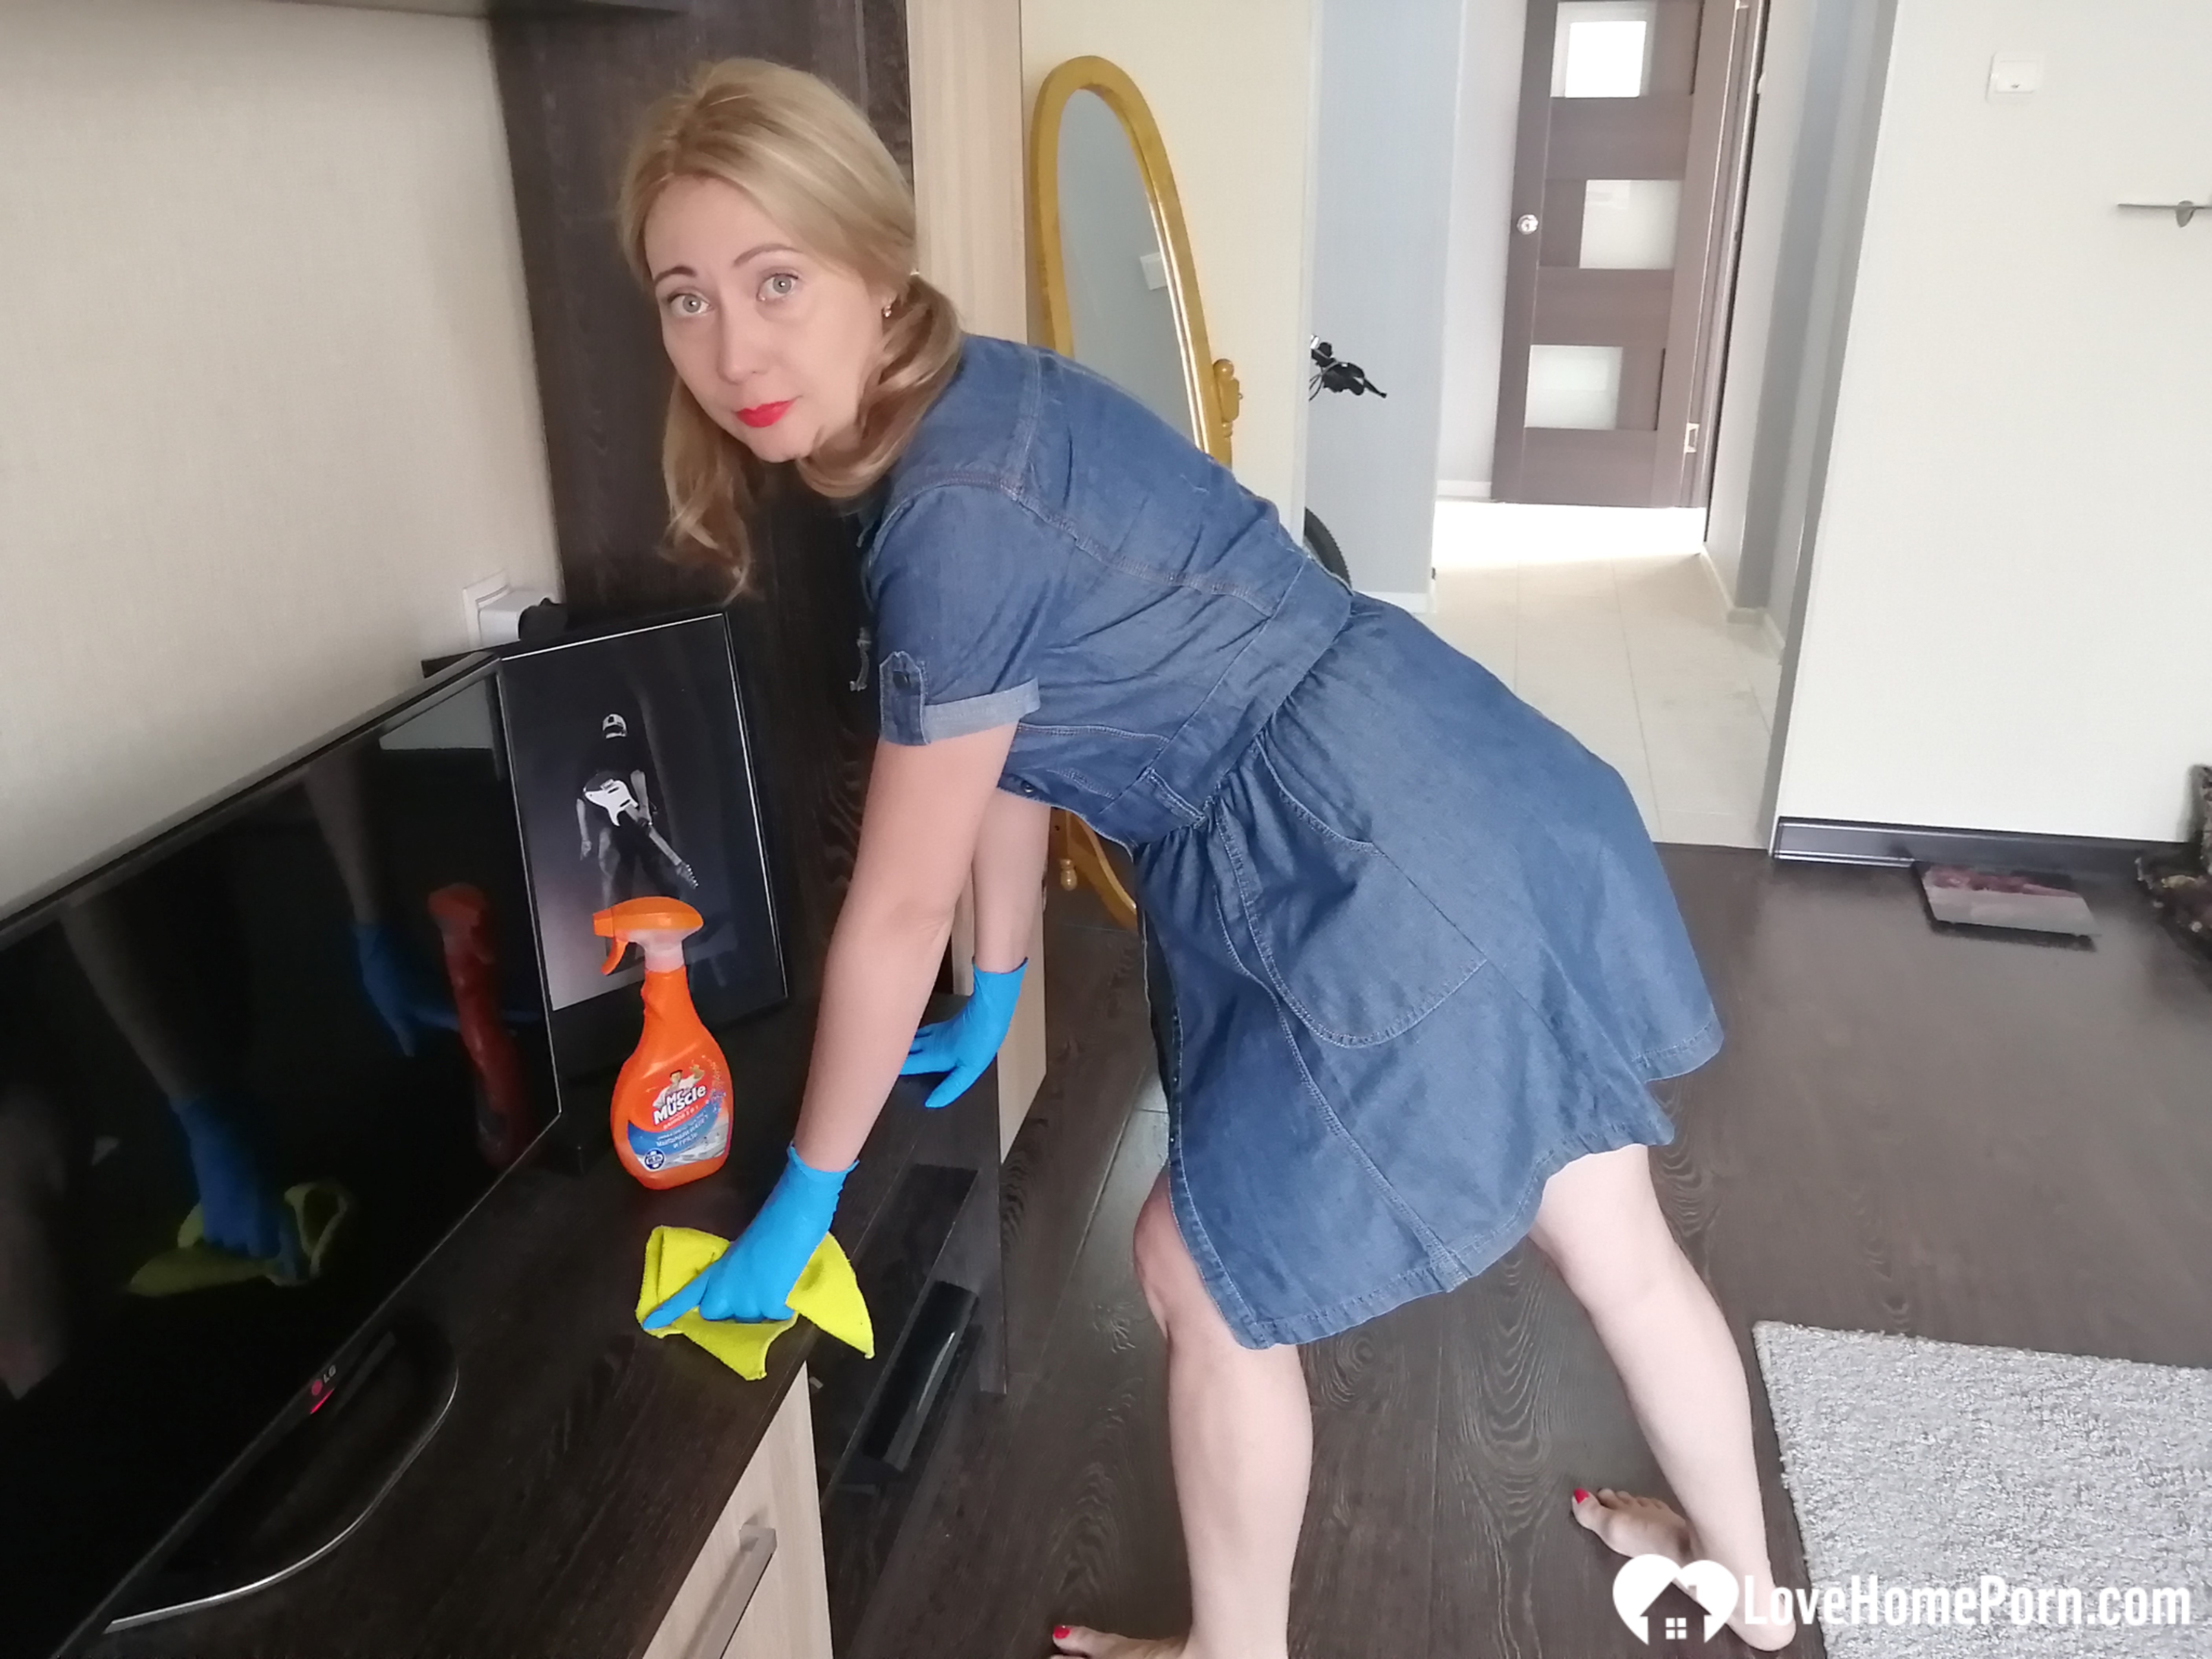 Cleaning lady teases while my wife's gone